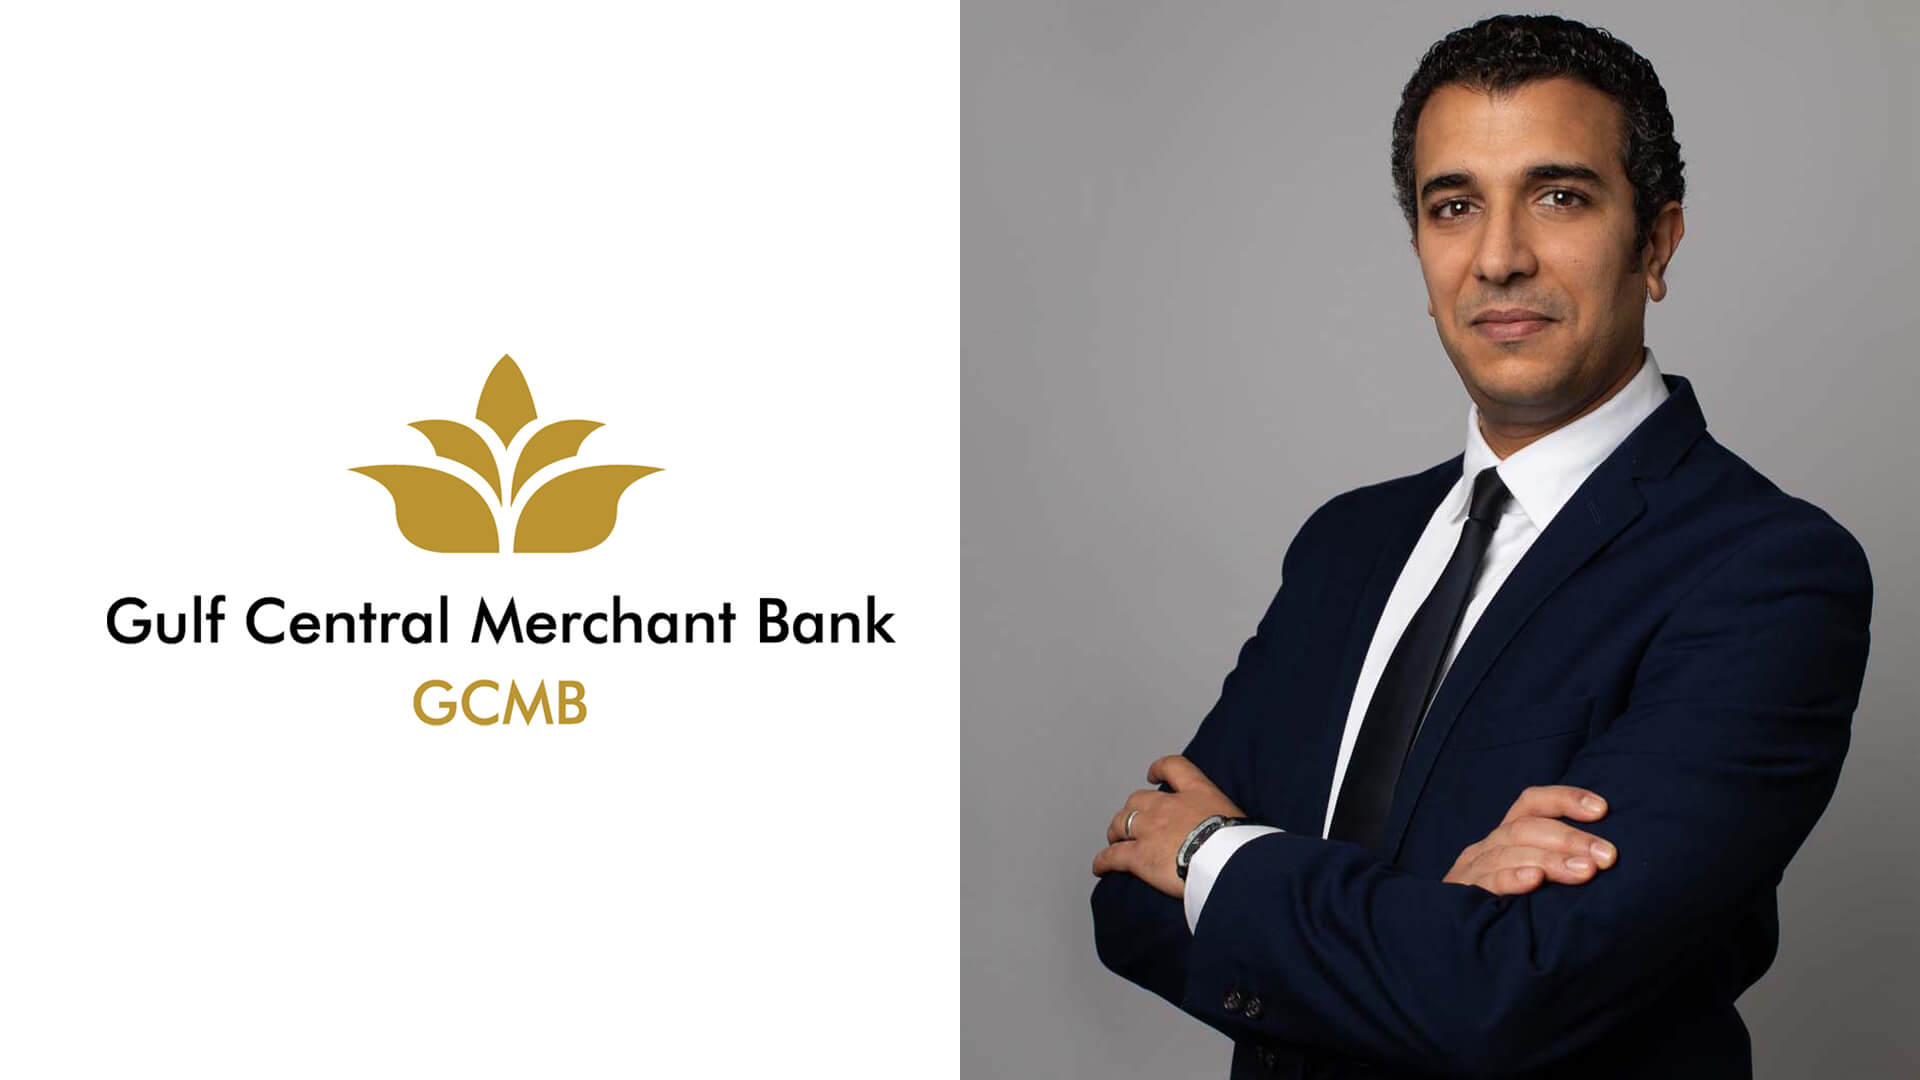 Gulf Central Merchant Bank: Challenging The Old Guards